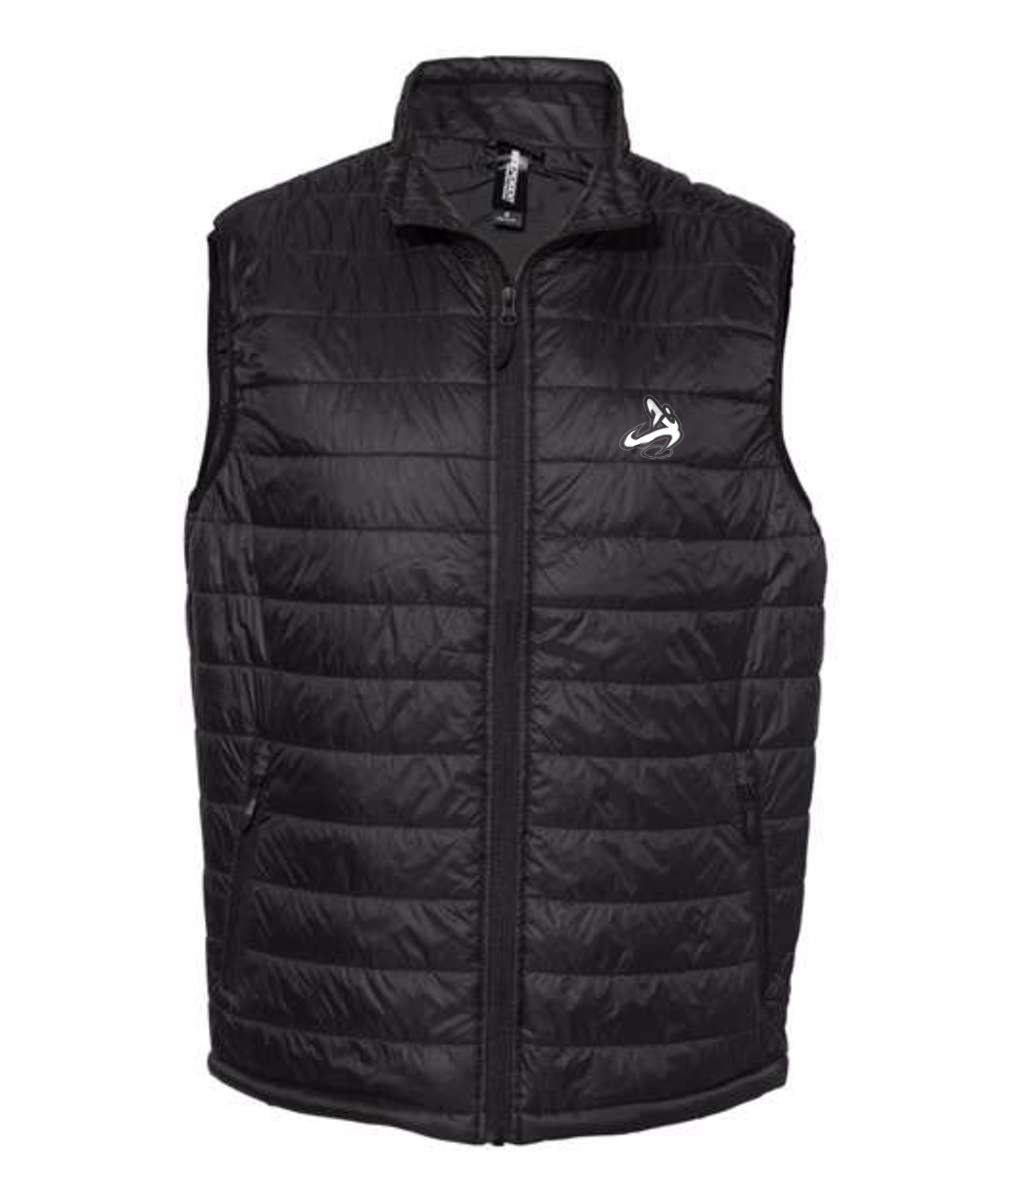 Athletic Apparatus Puffer Vest wl v1 Embroidered - Athletic Apparatus